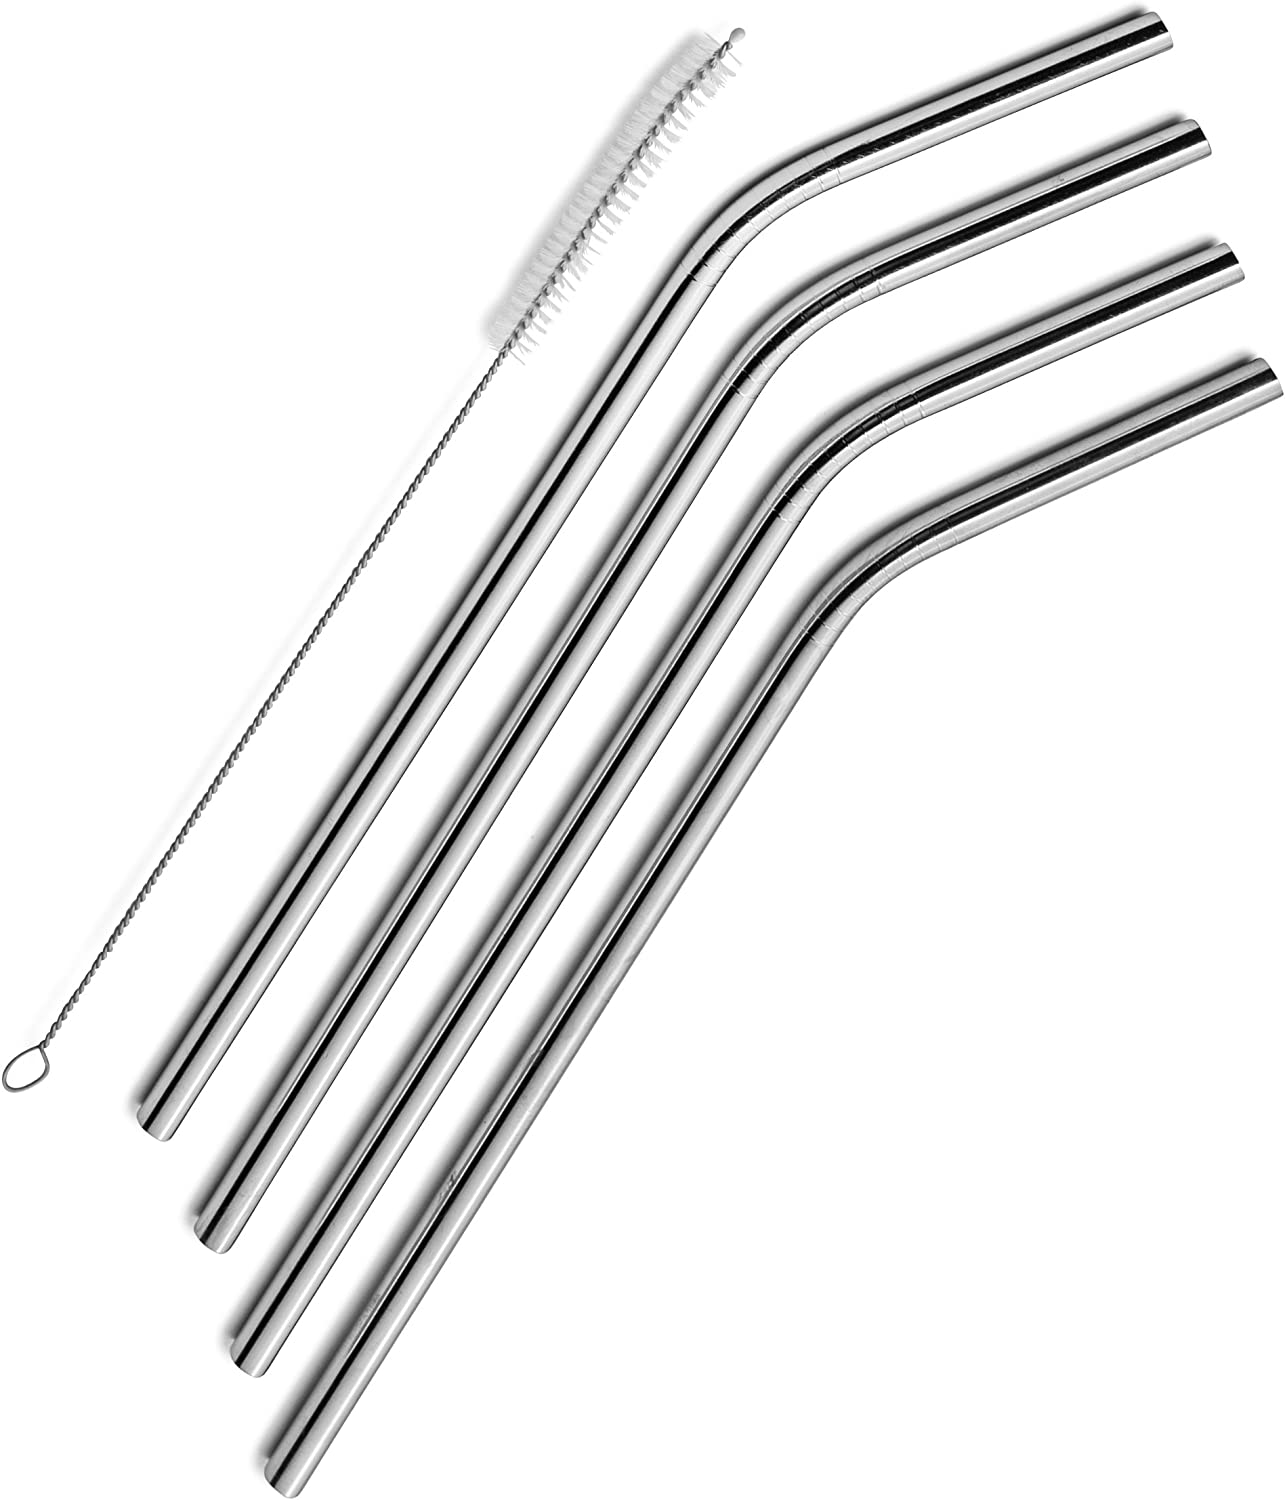 SipWell Cleaning Brush & Bent Reusable Metal Straws, 4-Pack